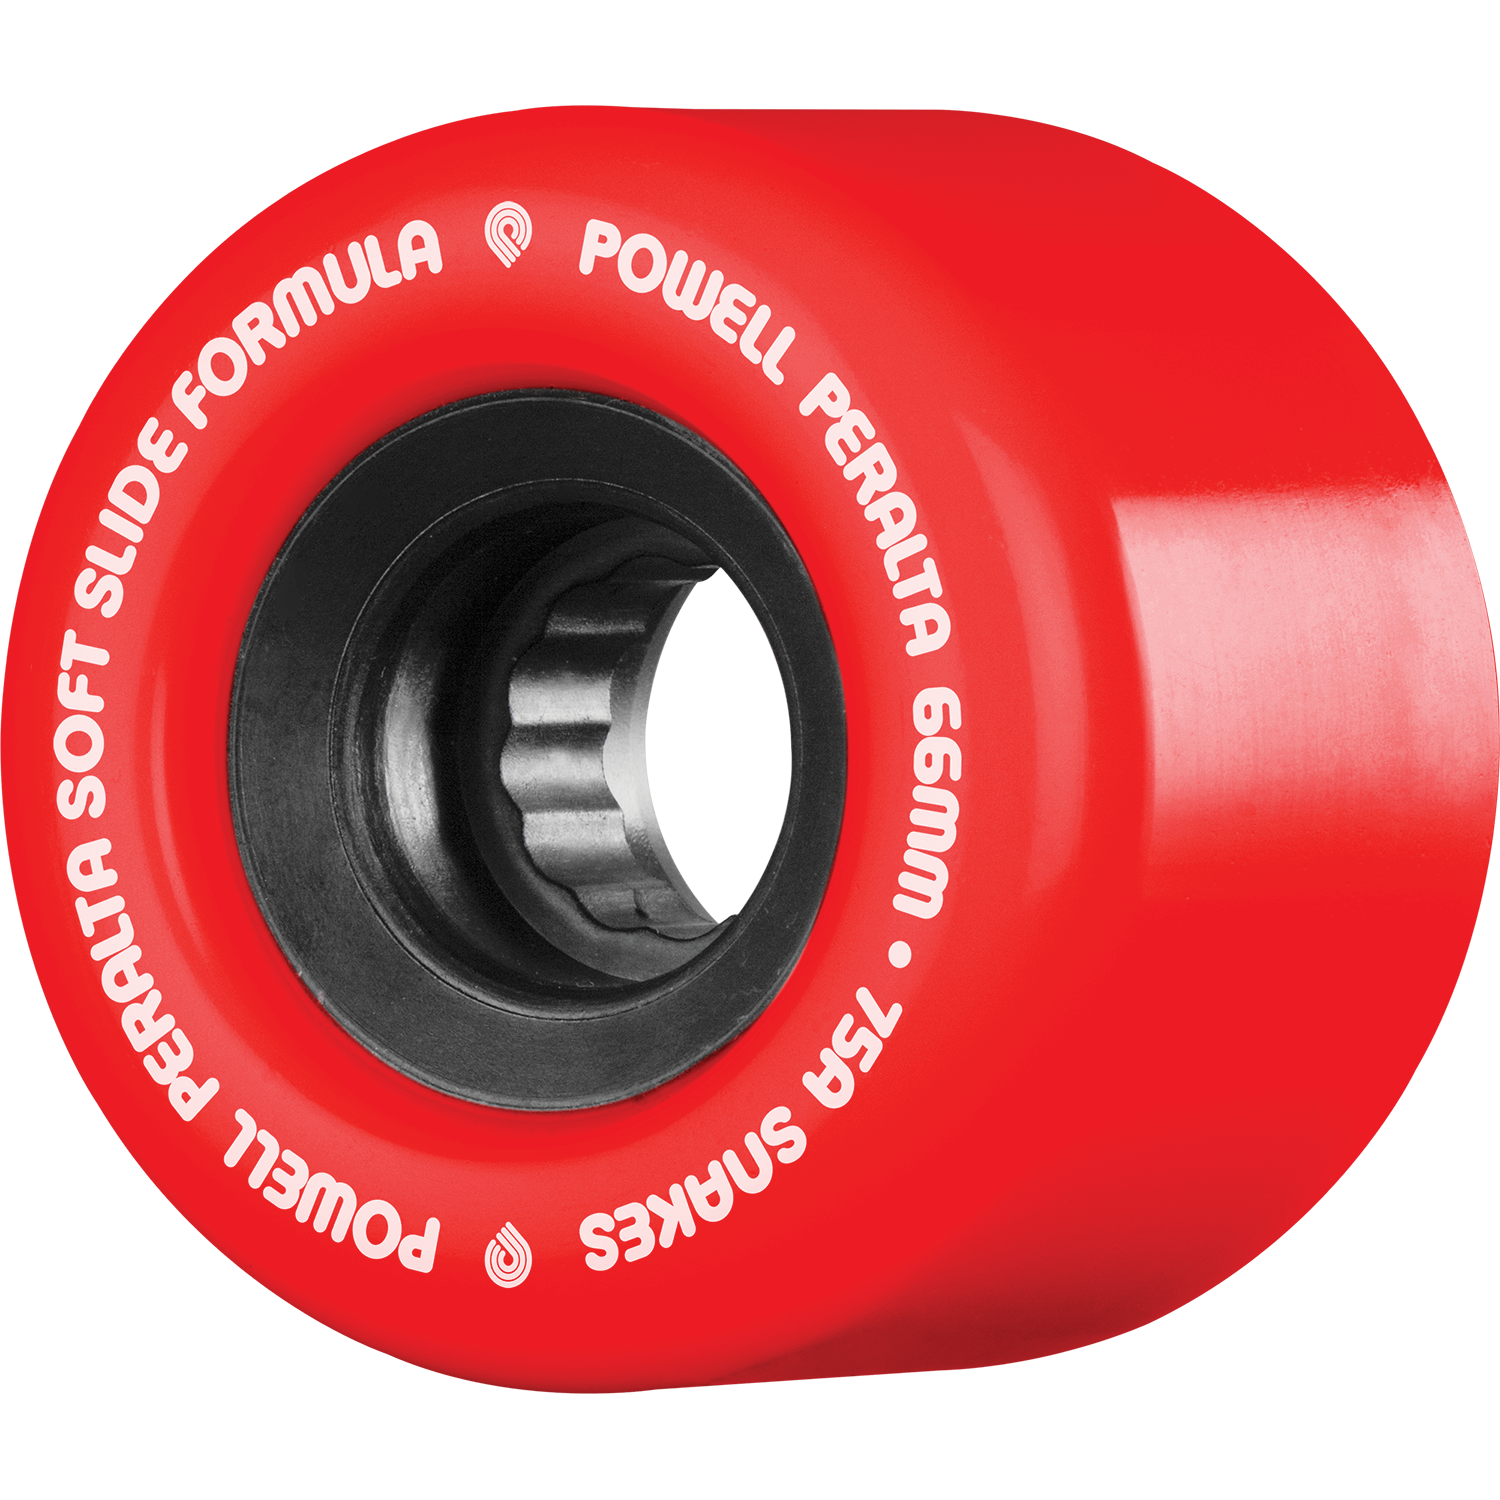 Powell Peralta Snakes Skateboard Wheels 66mm 75a 4pk Red